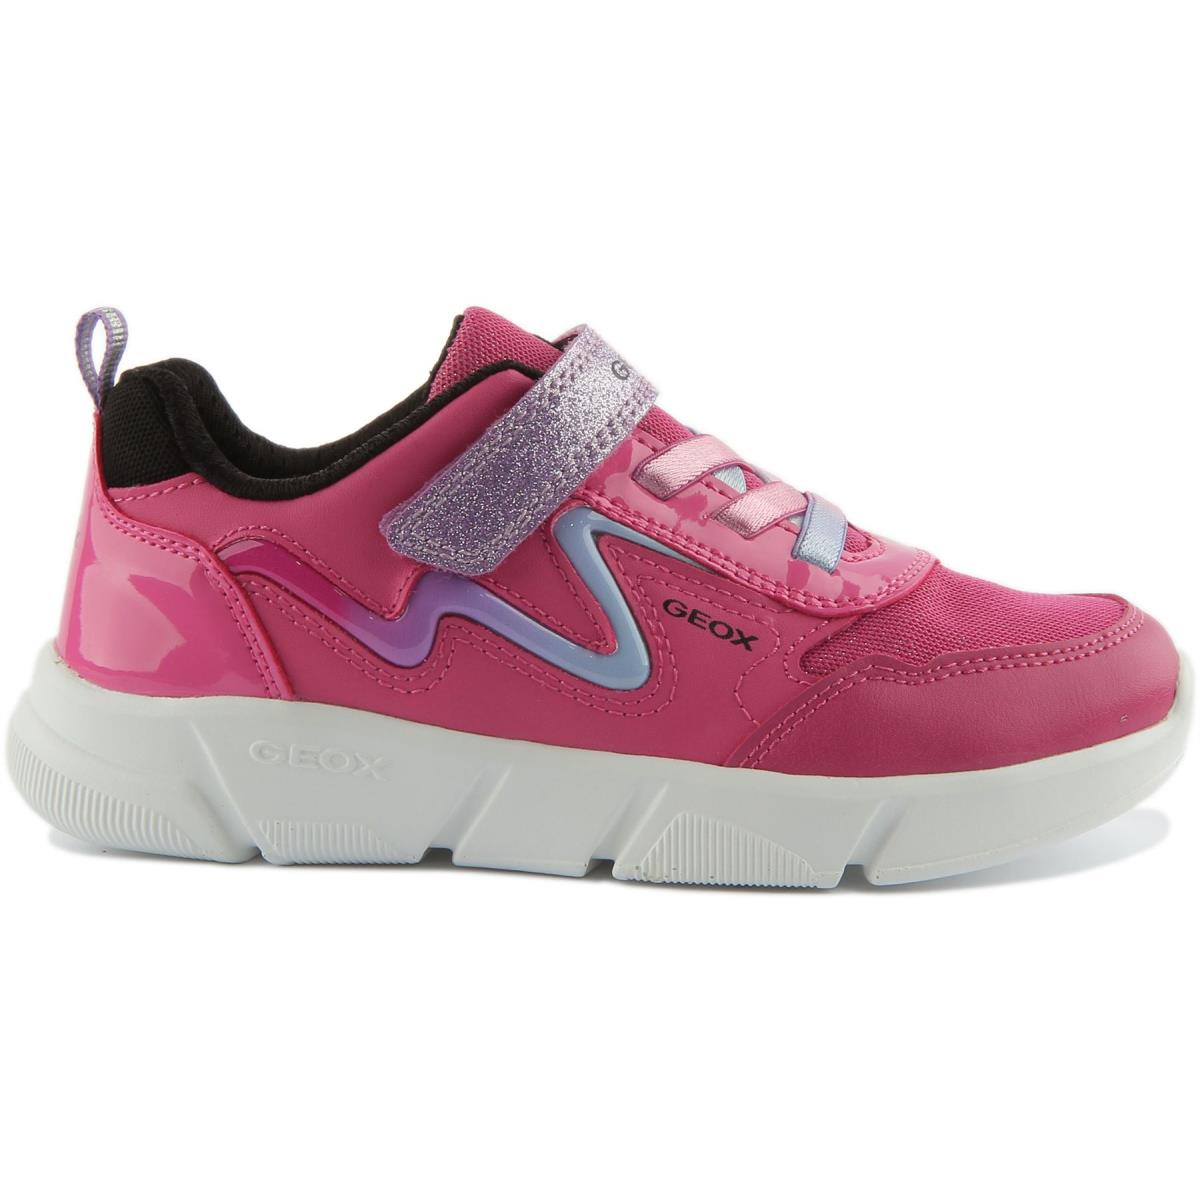 Geox J Aril Girls Single Strap Light Up Sneakers In Pink Size US 8C - 13C